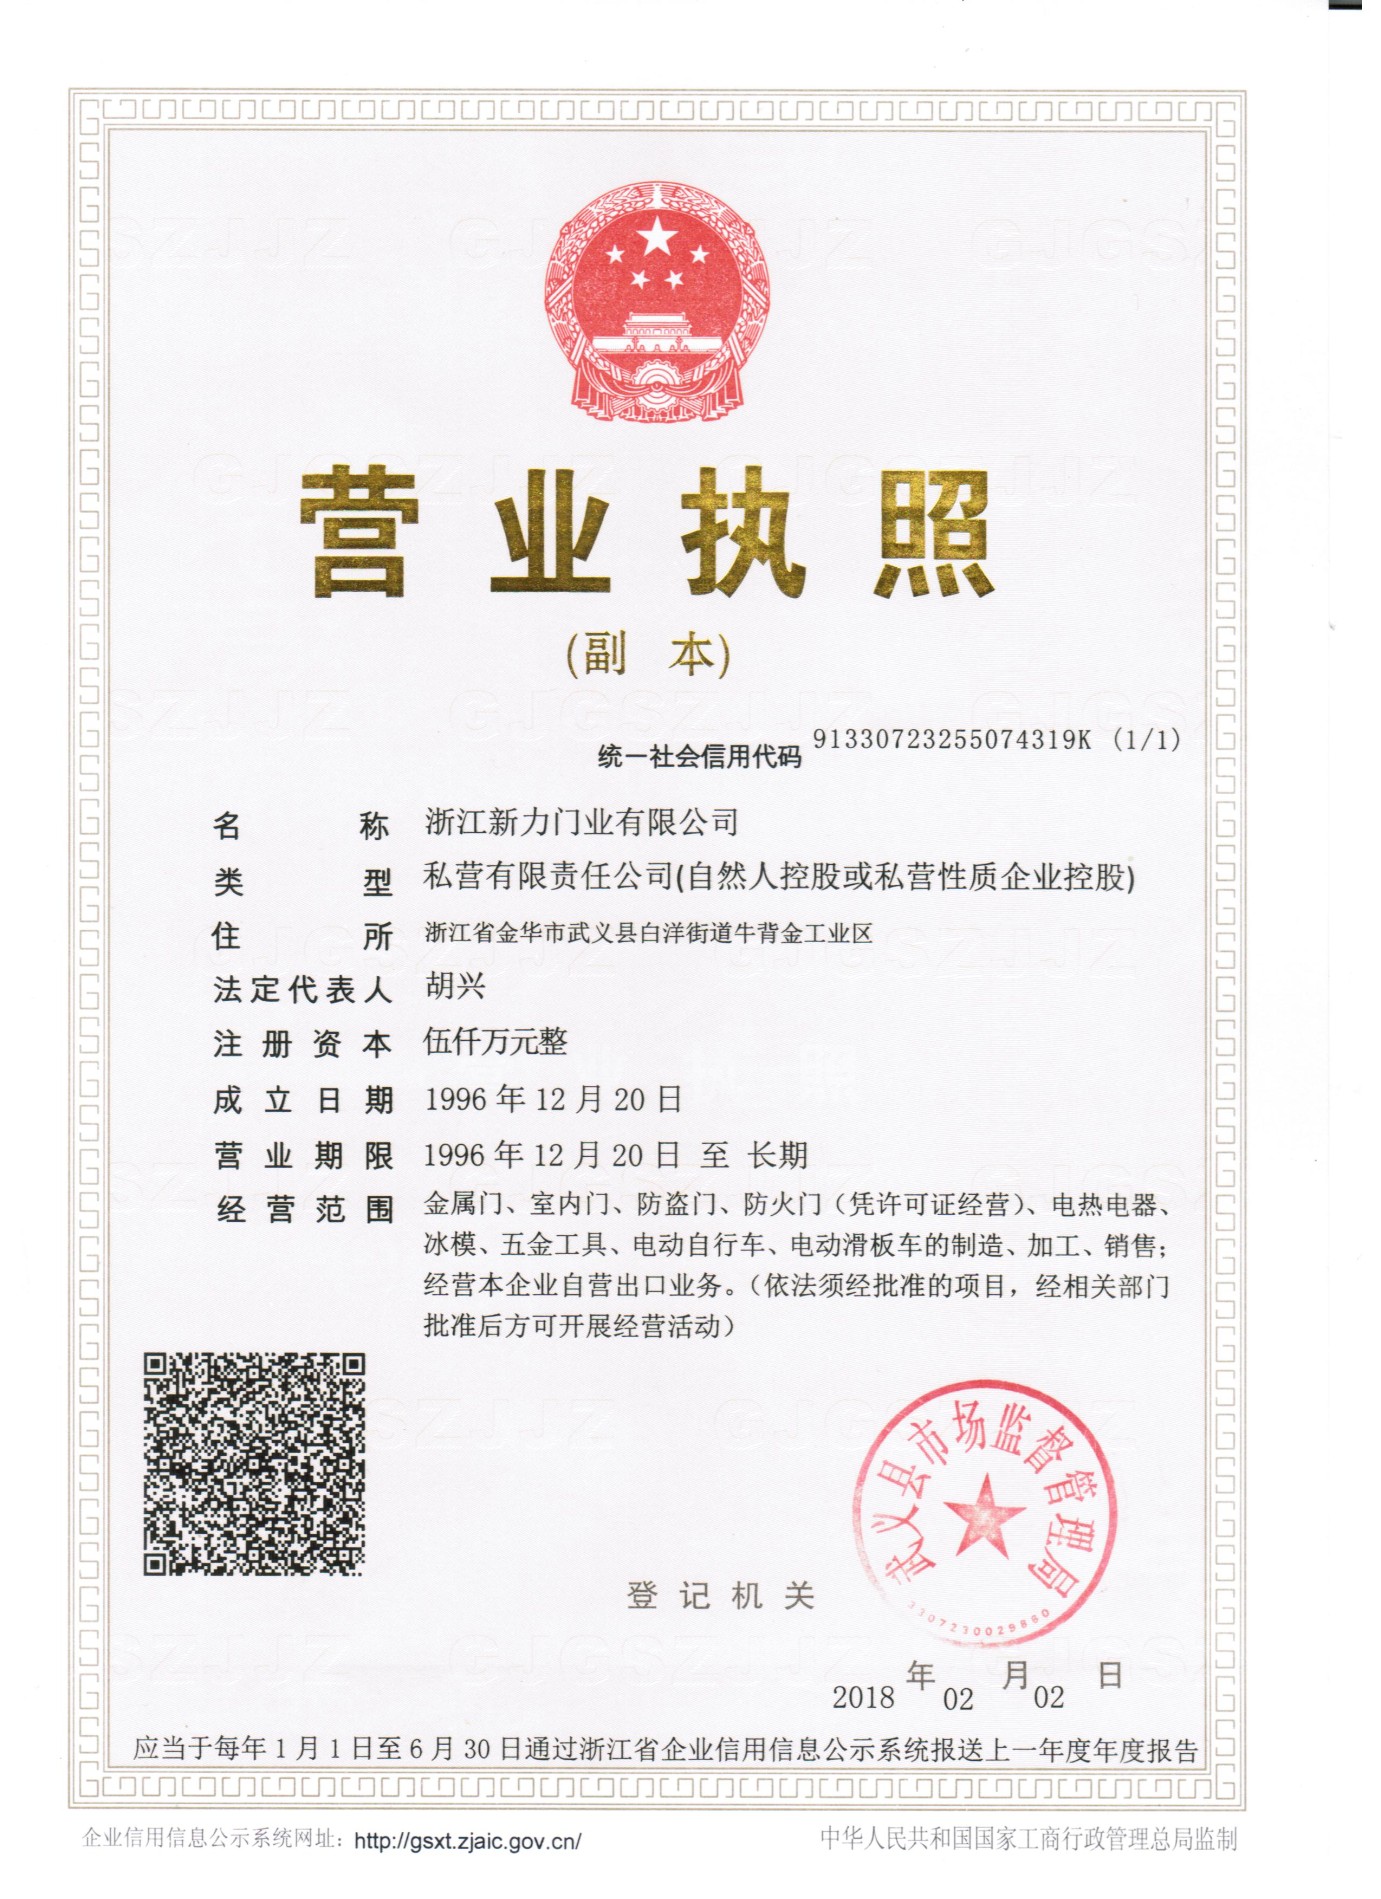 Xinli Group Business License